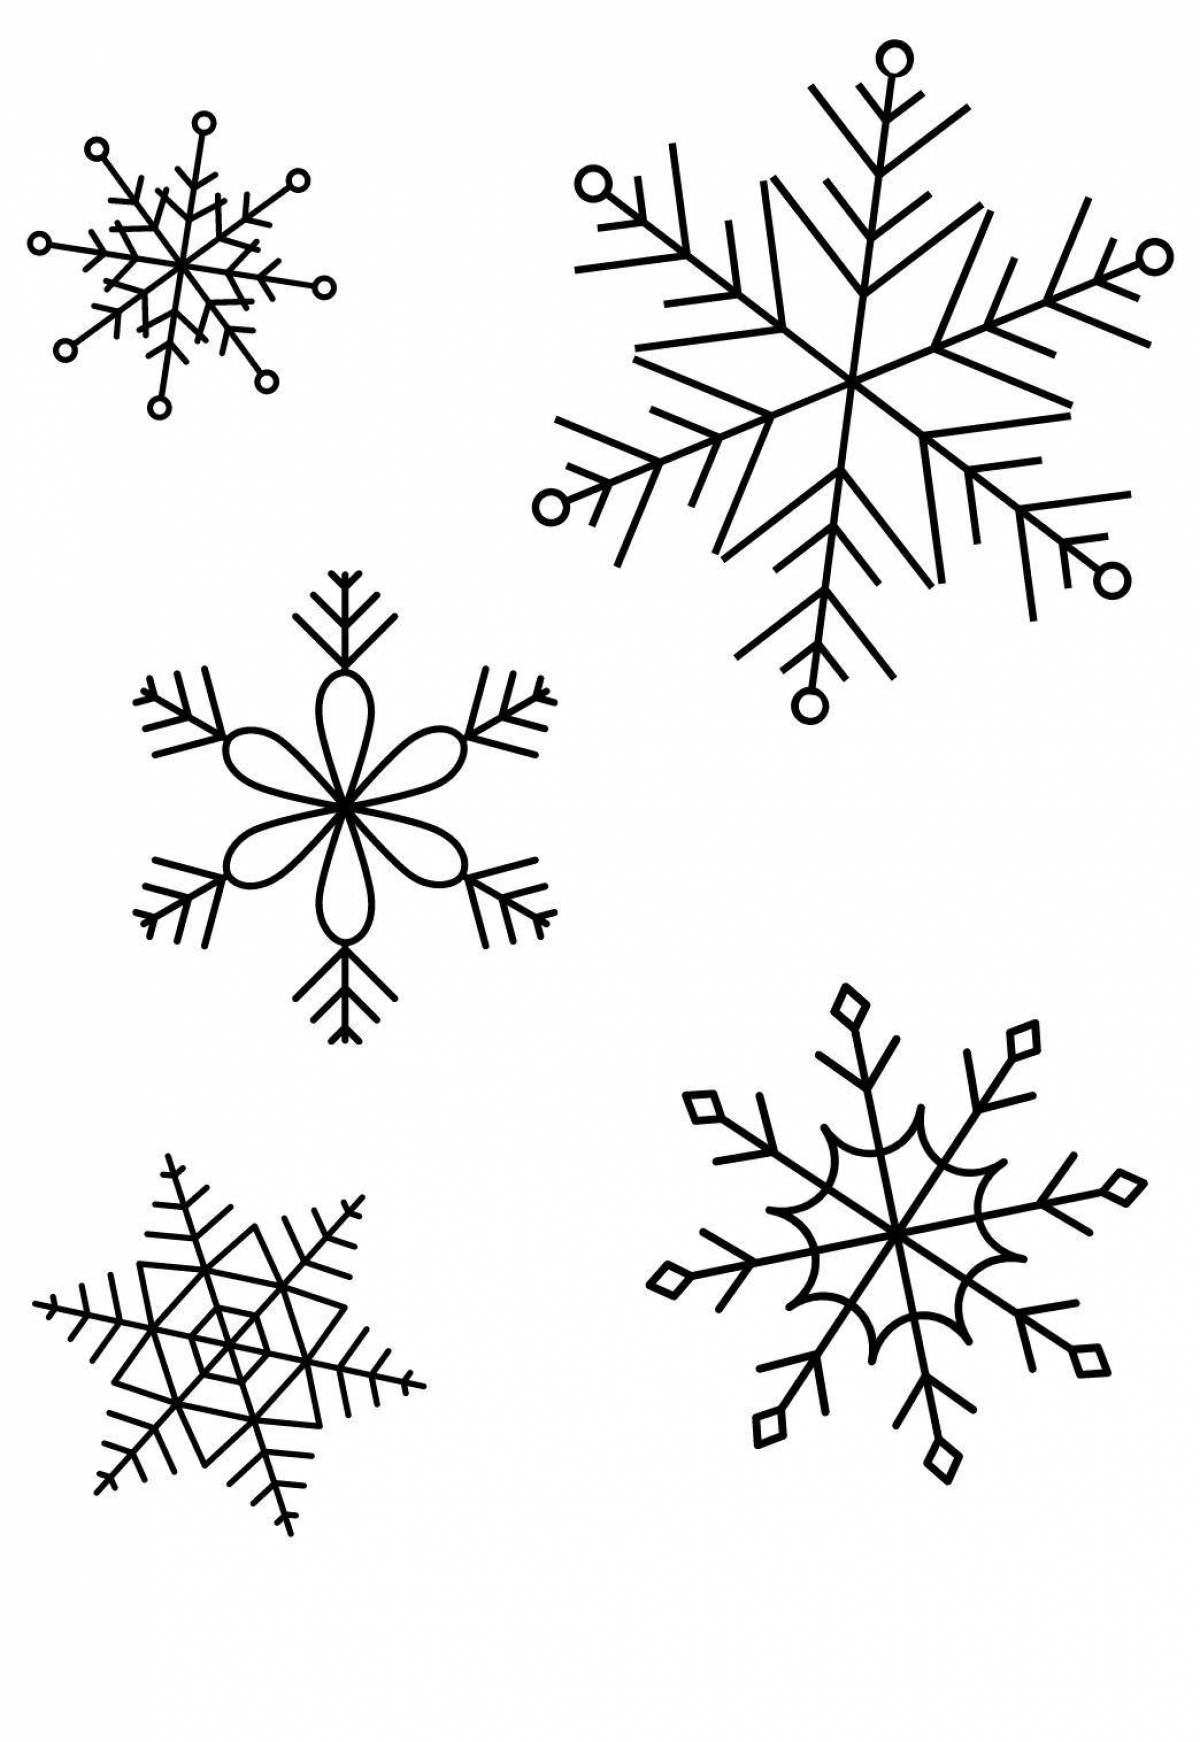 Magic snowflake coloring book for kids 4-5 years old